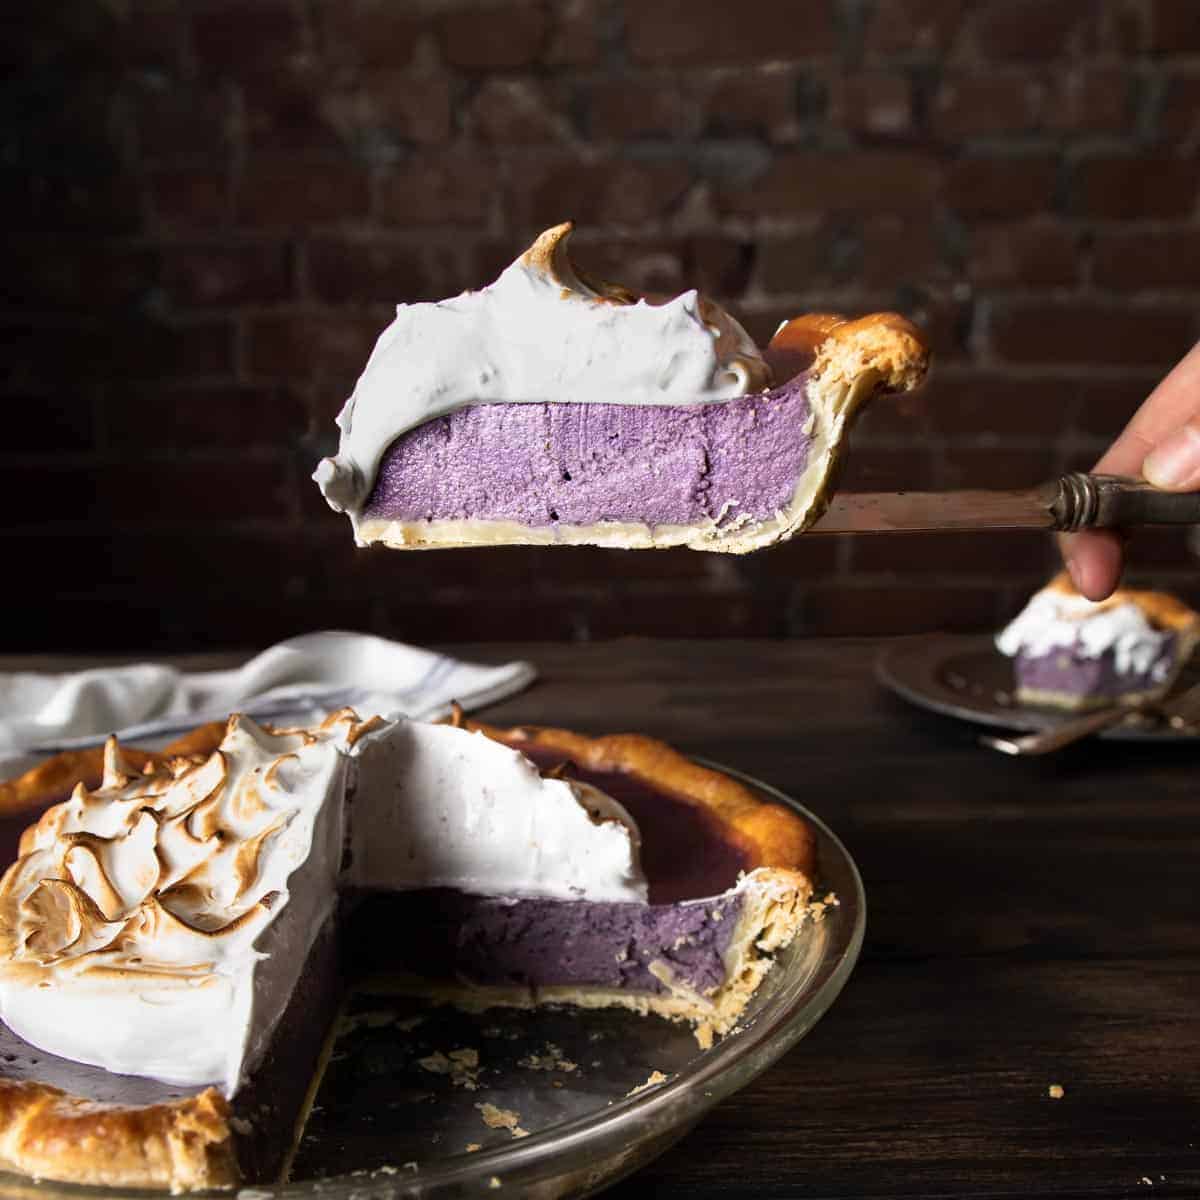 A slice of purple sweet potato pie being lifted on a pie server